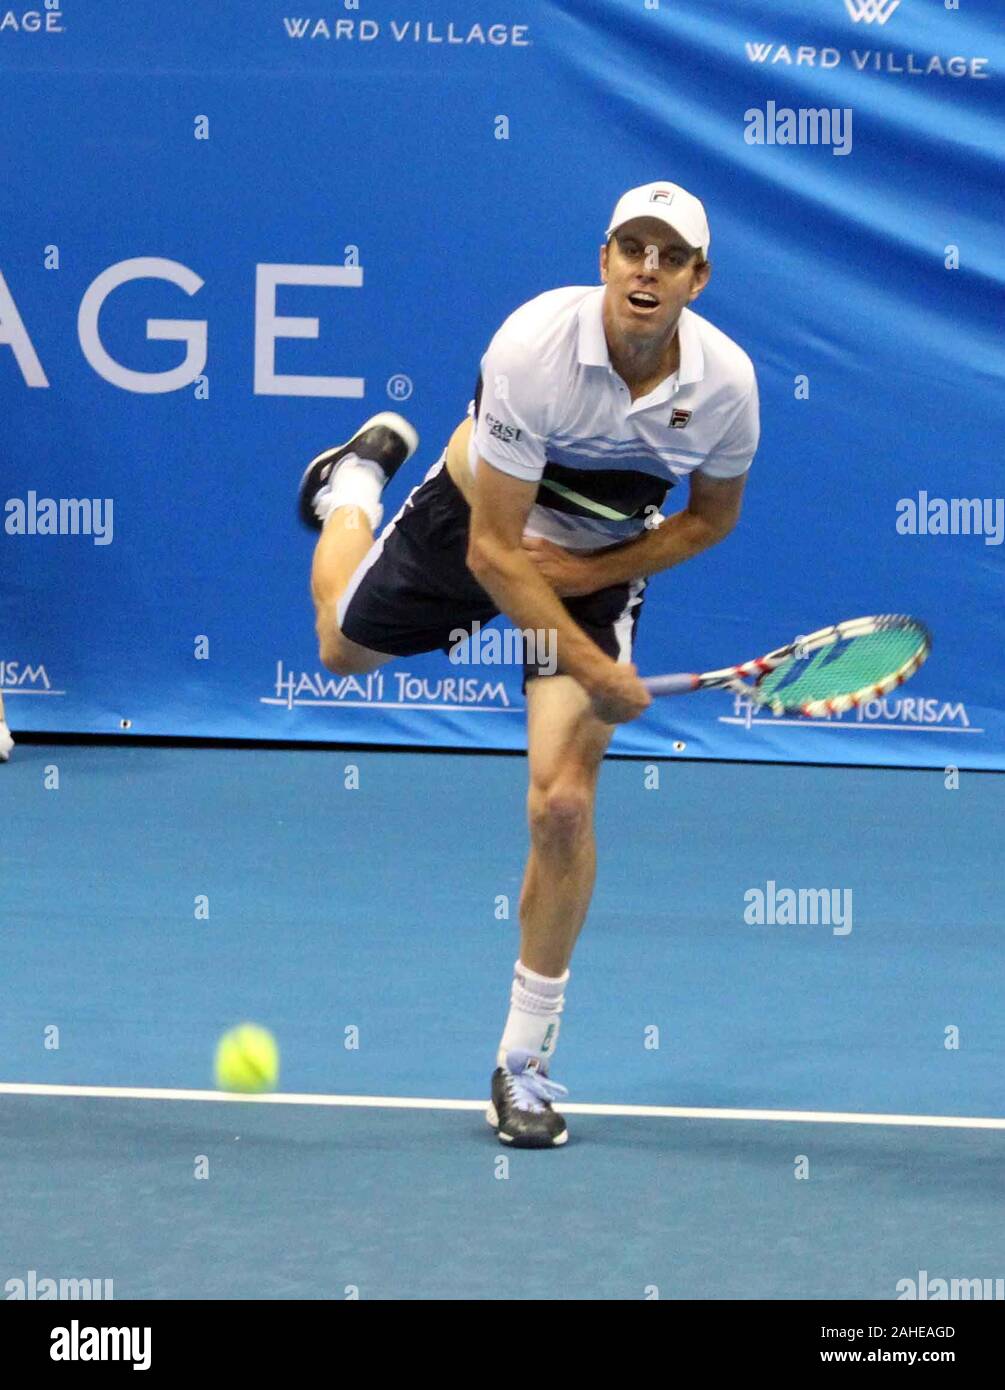 December 28, 2019 - Sam Querrey serves the ball in the championship match at the Hawaii Open invitational tournament between 44th ranked Sam Querrey (USA) and unranked Brandon Nakashima (USA) at the Stan Sheriff Center in Honolulu, HI - Michael Sullivan/CSM Stock Photo